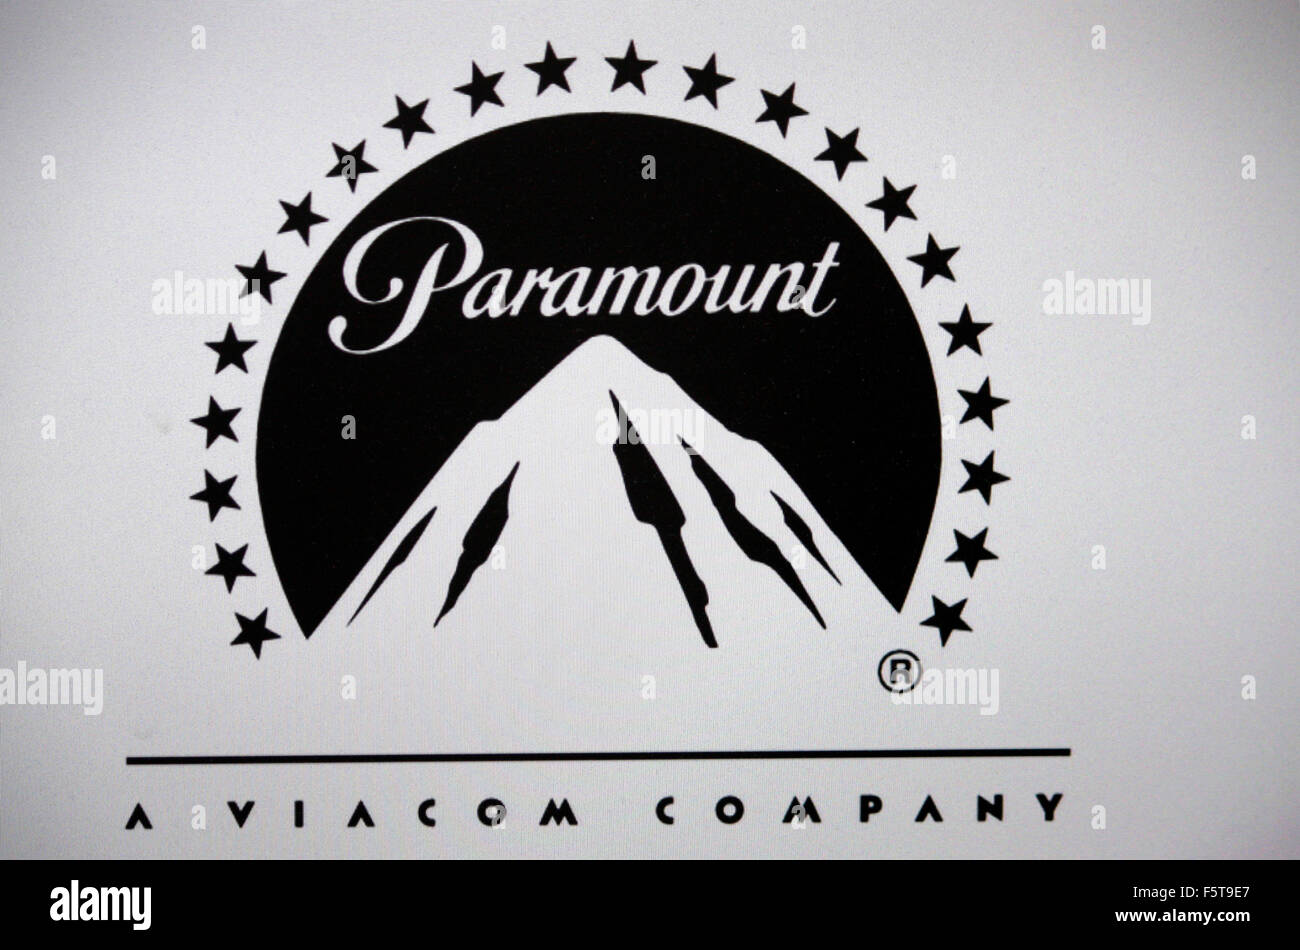 Markenname: "Paramount Pictures", Berlin. Stockfoto